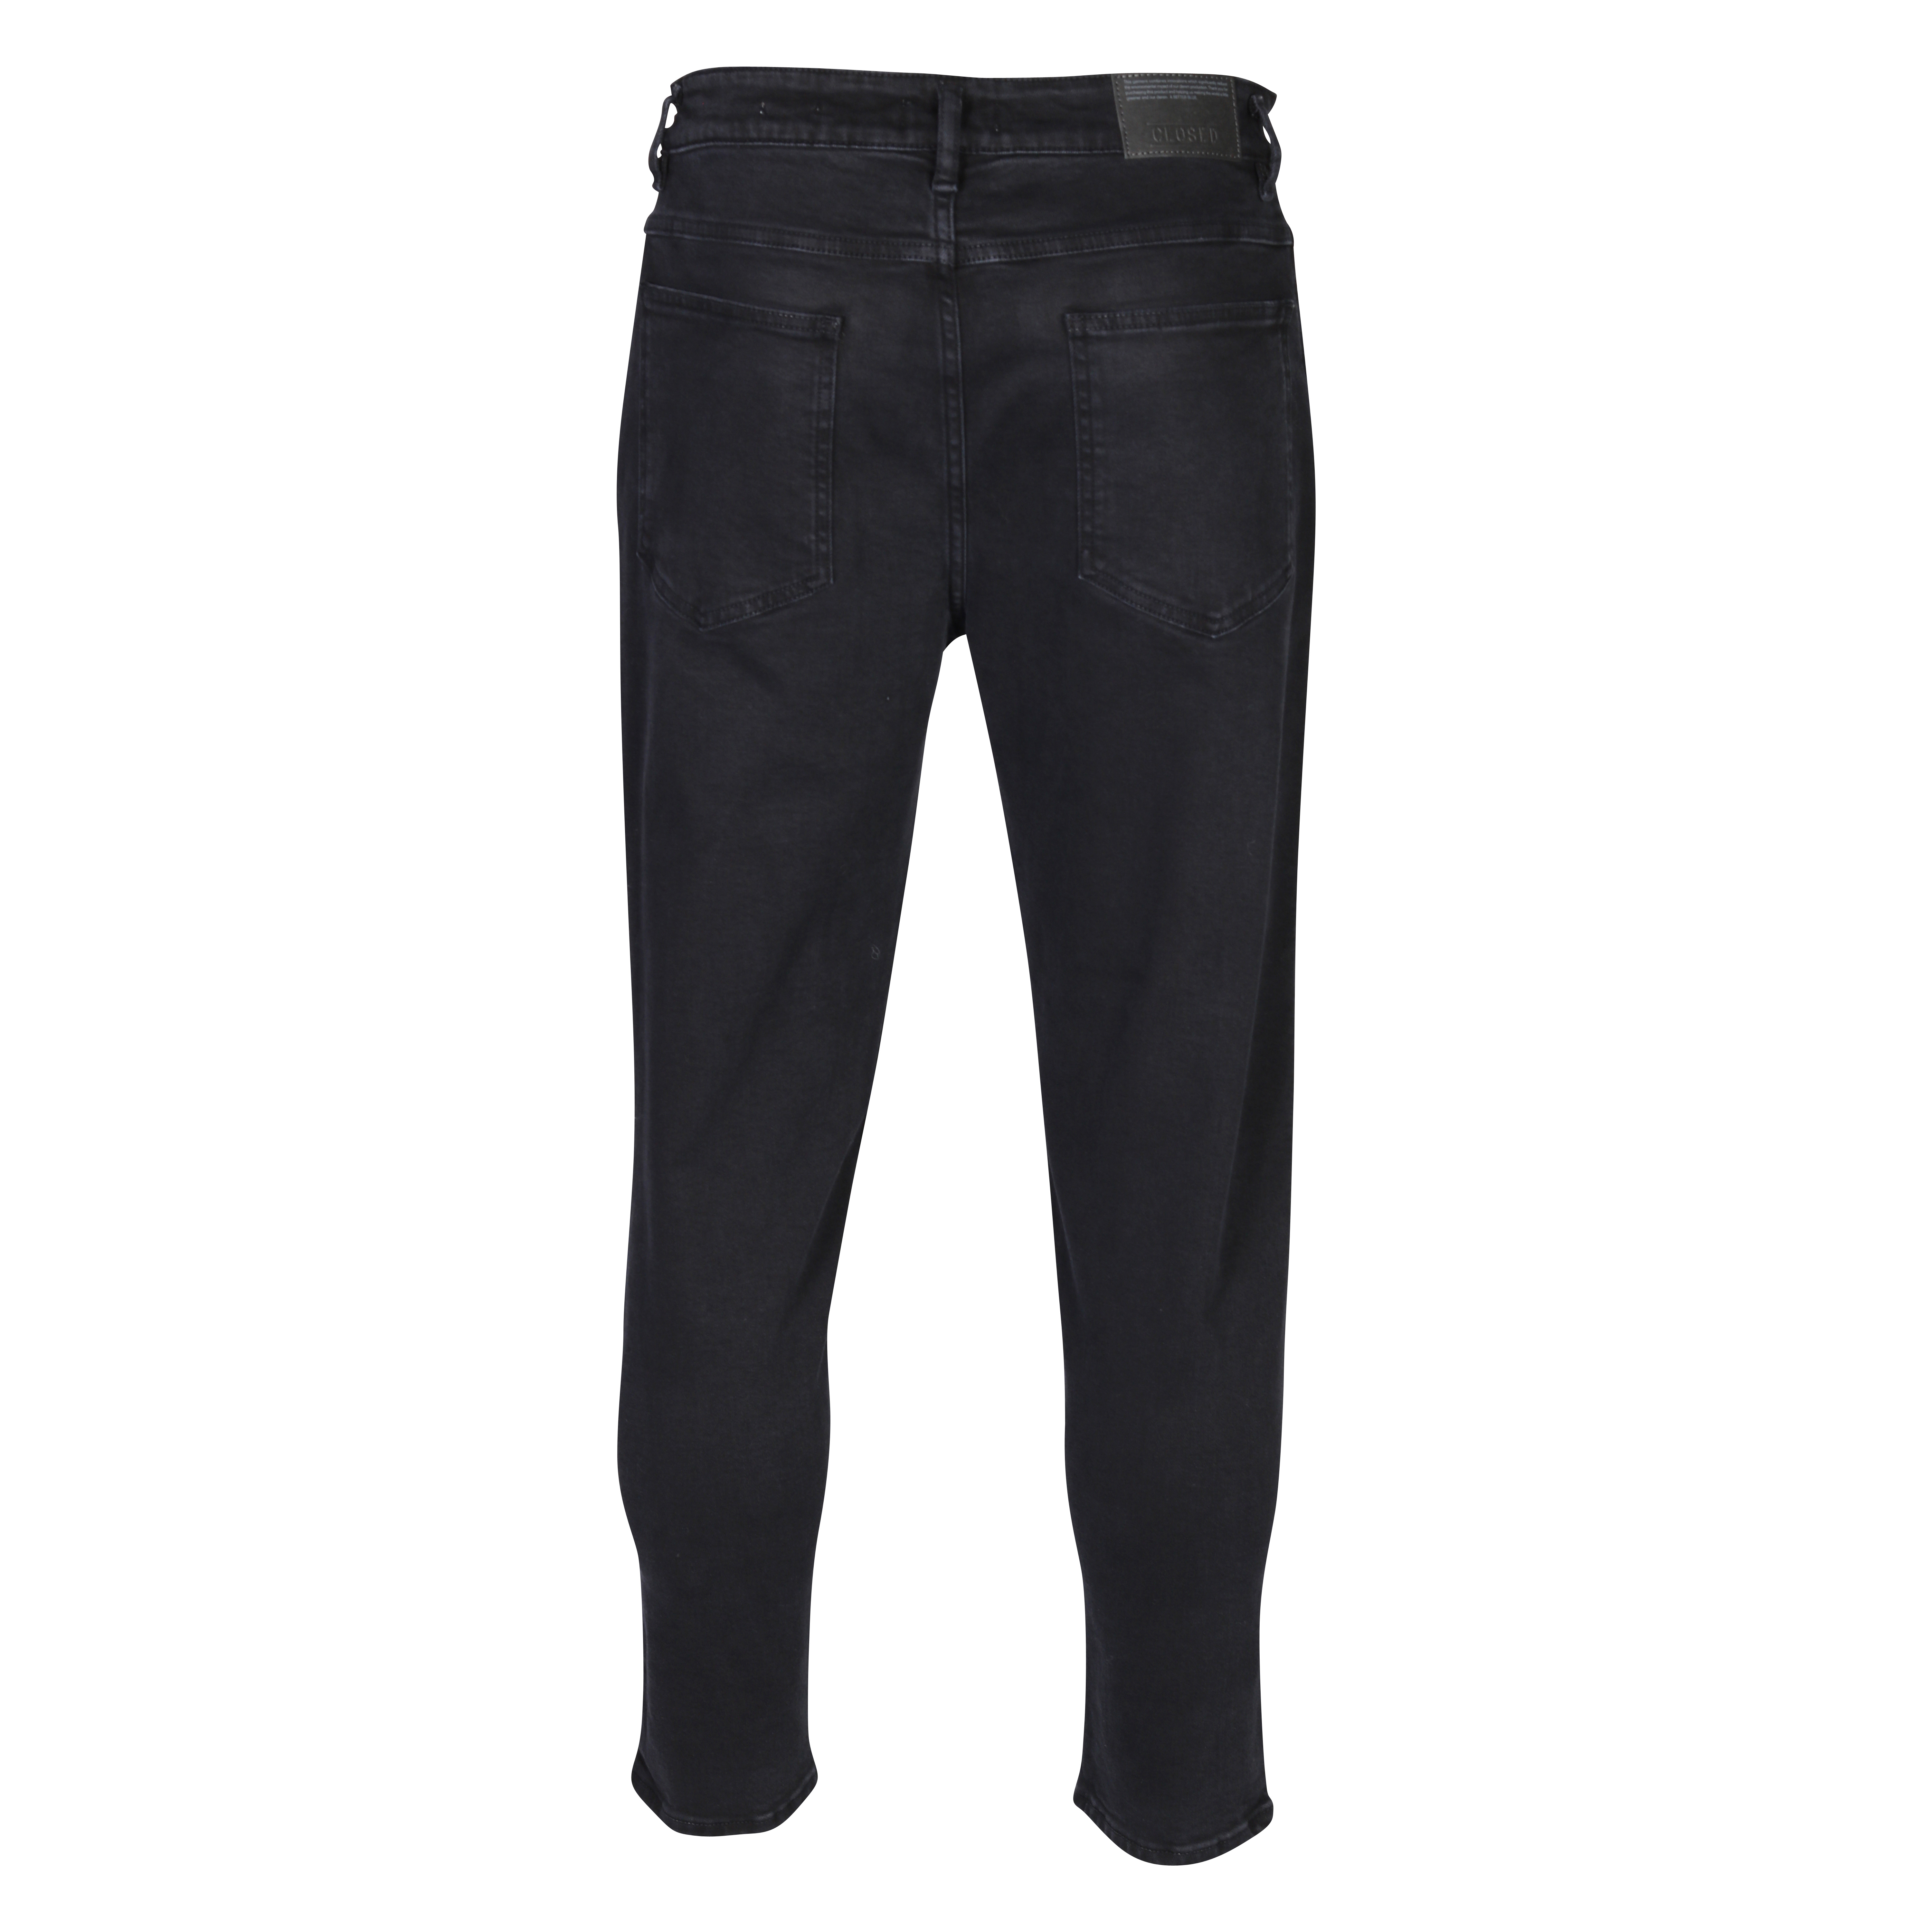 CLOSED X-Lent Tapered Jeans in Black 34